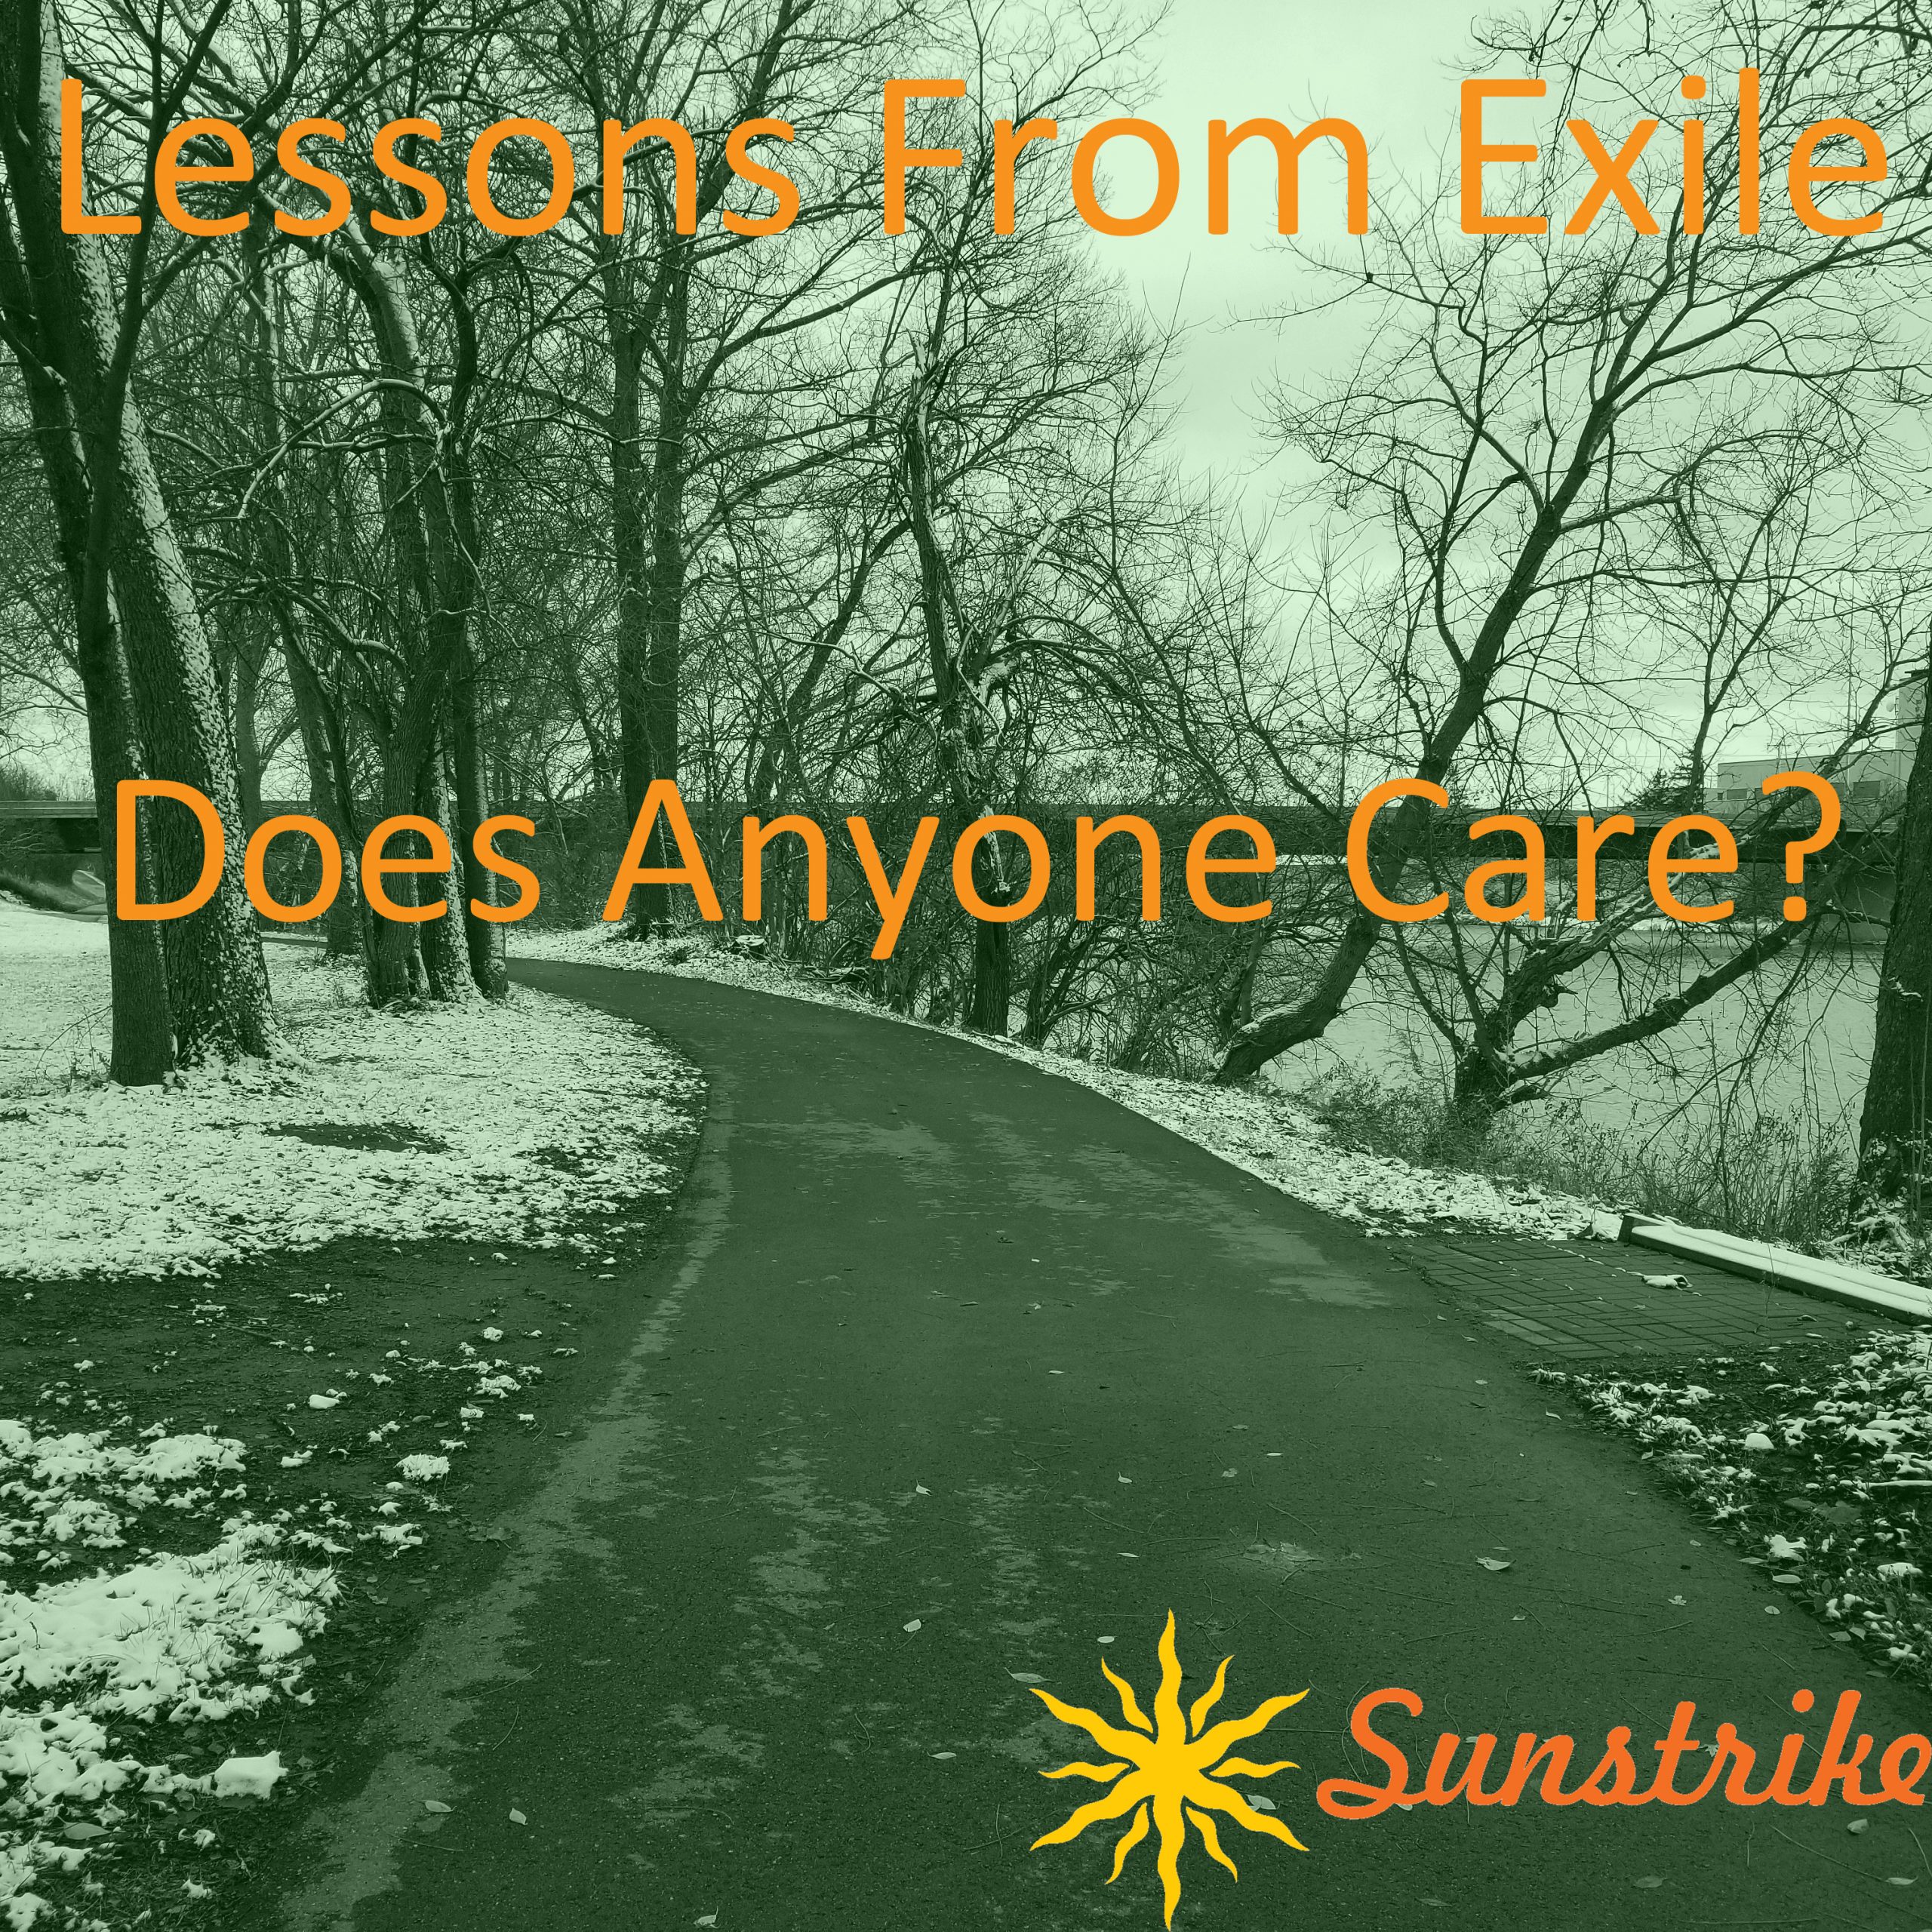 Lessons from Exile #99: Does Anyone Care?